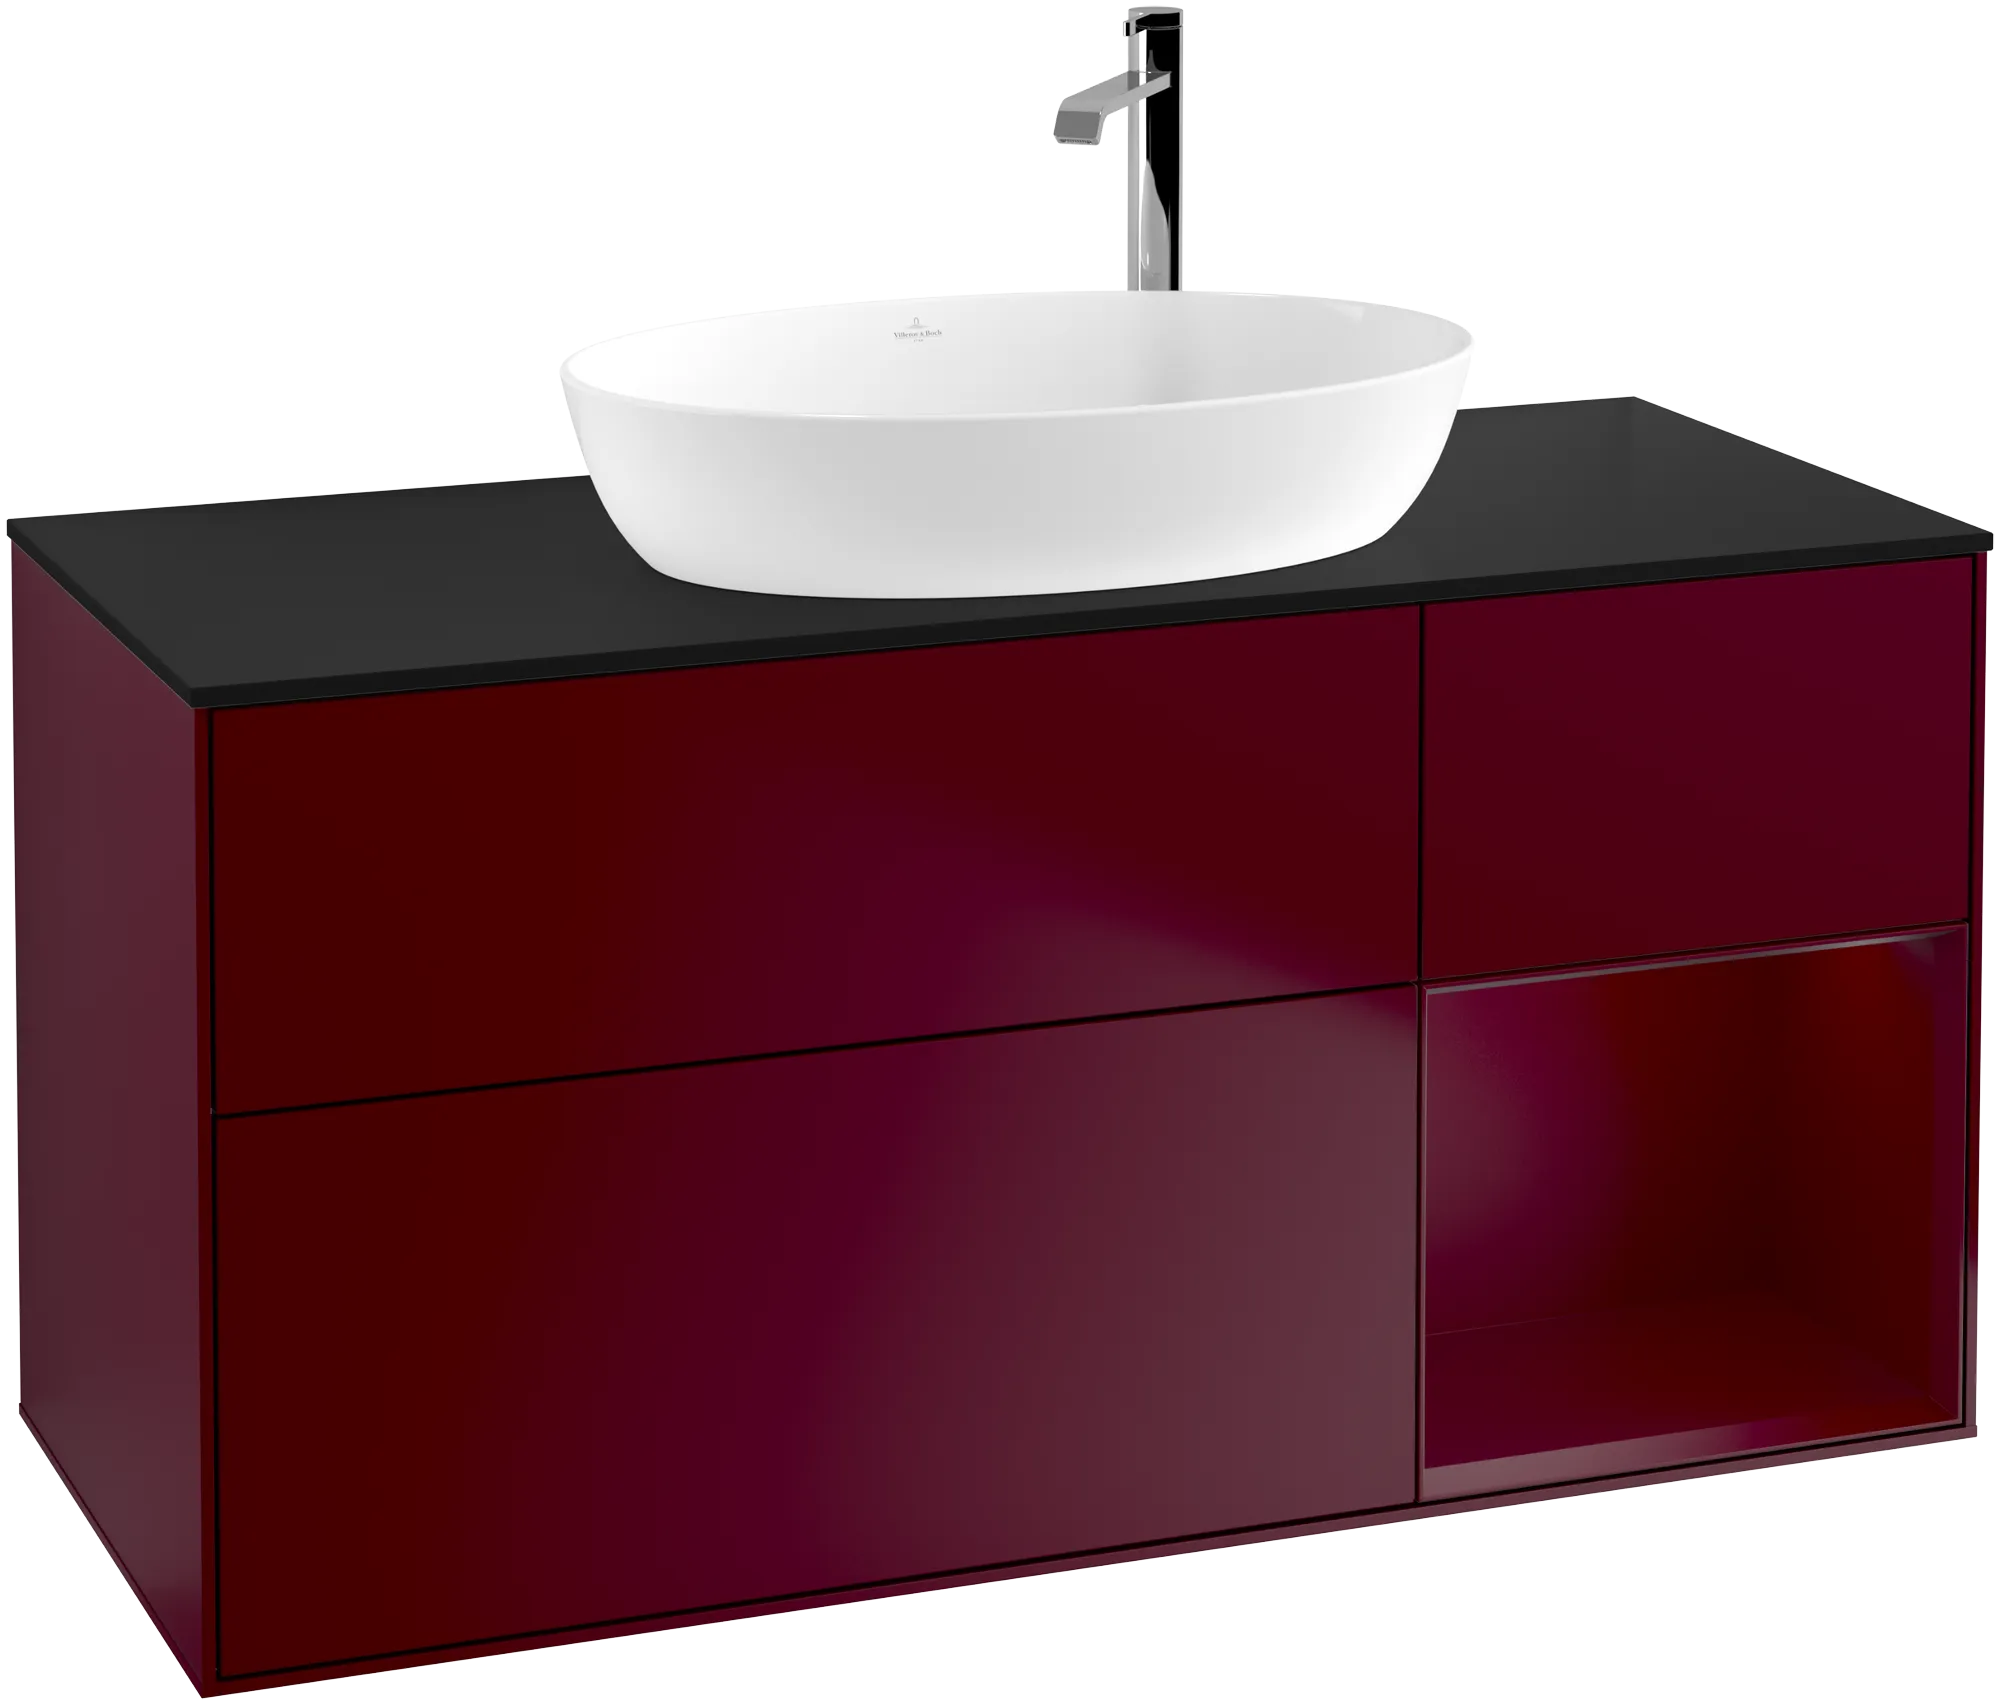 Obrázek VILLEROY BOCH Finion Vanity unit, with lighting, 3 pull-out compartments, 1200 x 603 x 501 mm, Peony Matt Lacquer / Peony Matt Lacquer / Glass Black Matt #G952HBHB